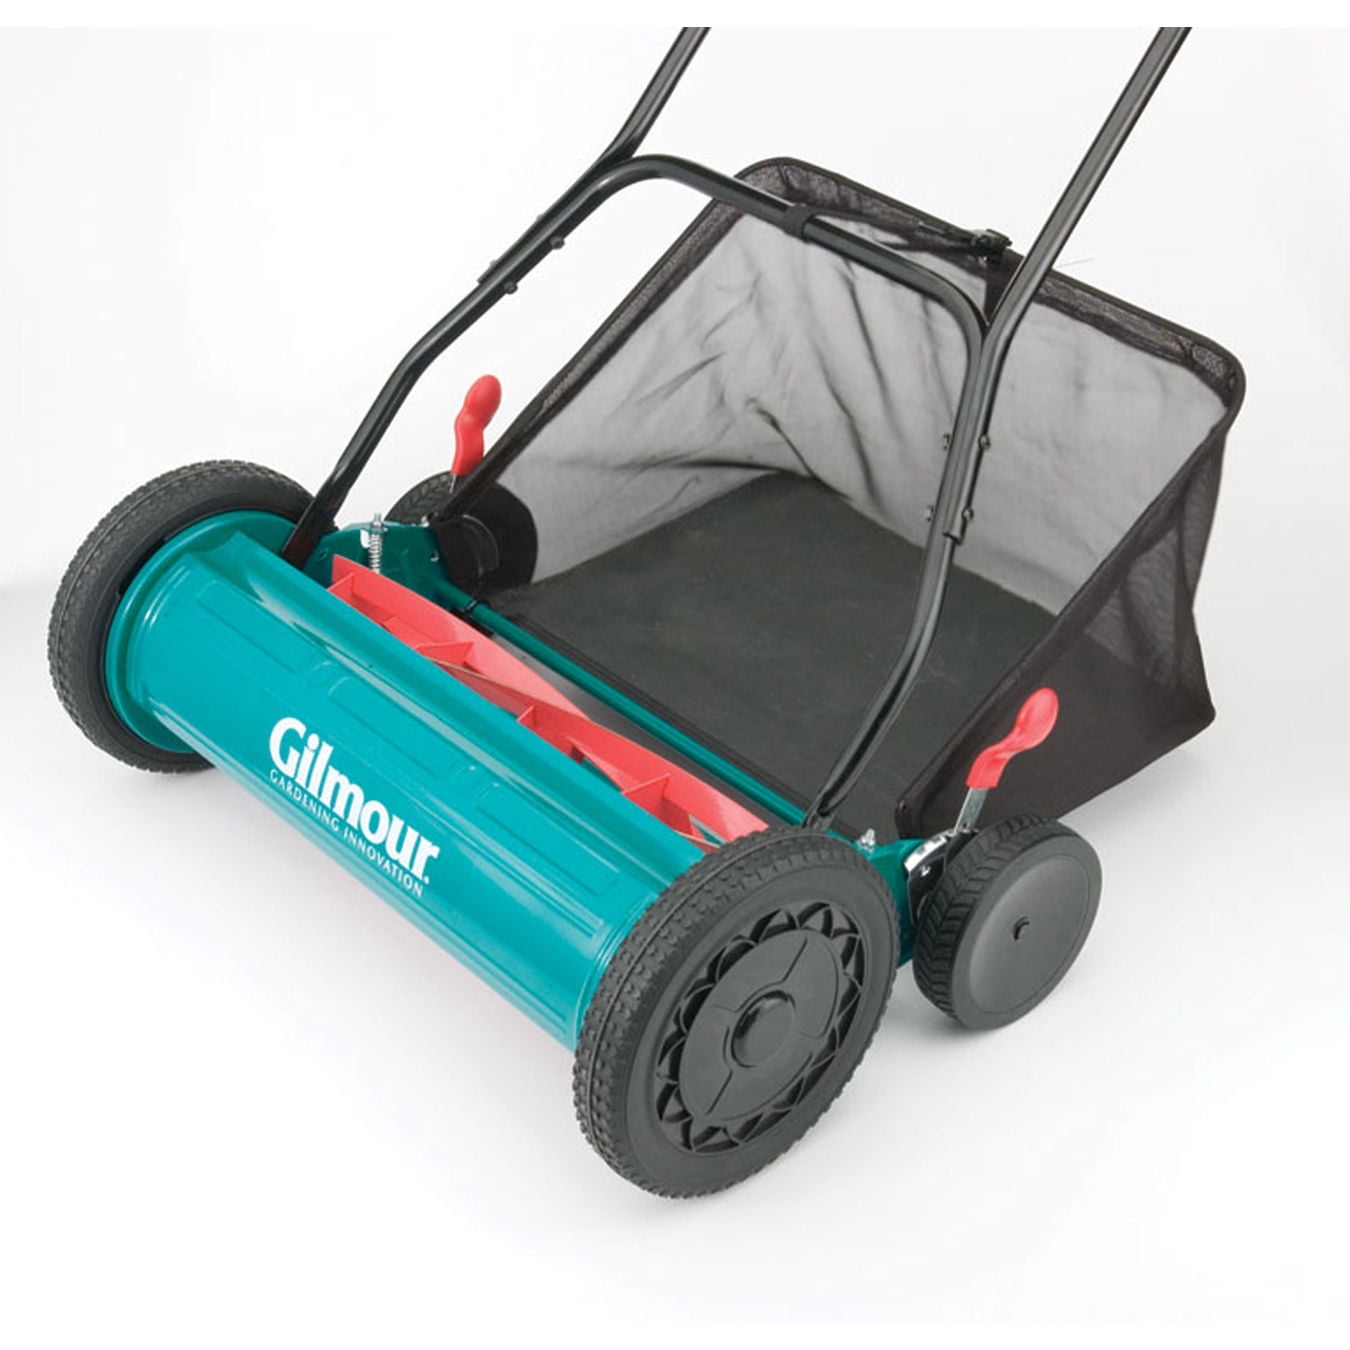 Gilmour RM30 20-Inch Reel Mower with Grass Catcher 